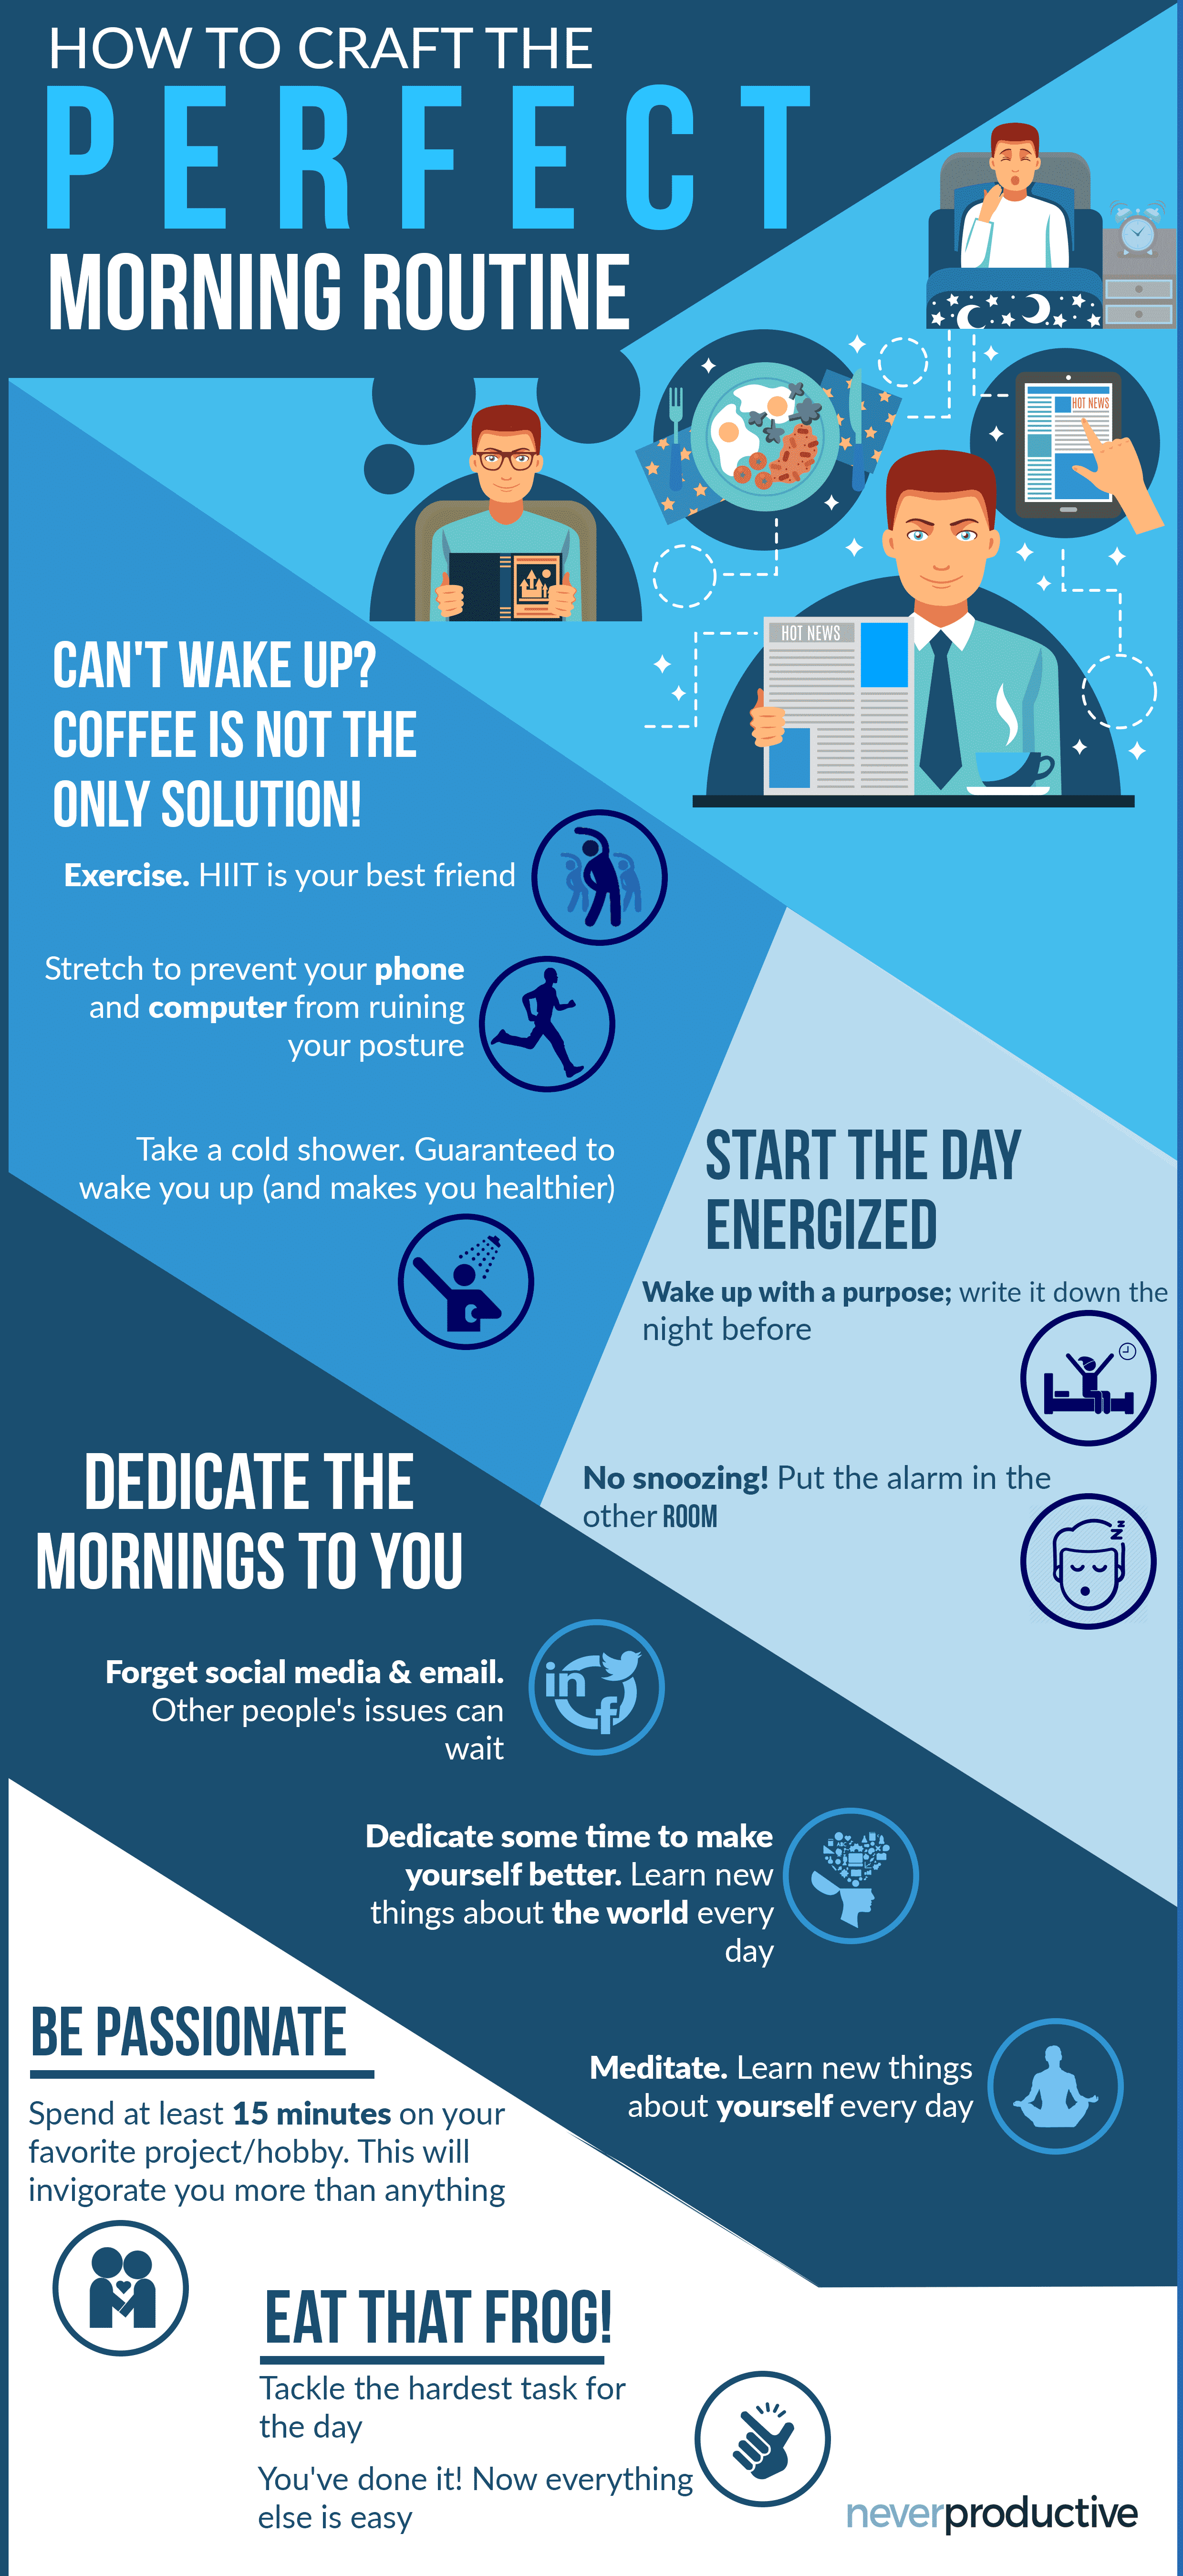 How to Craft the Perfect Morning Routine